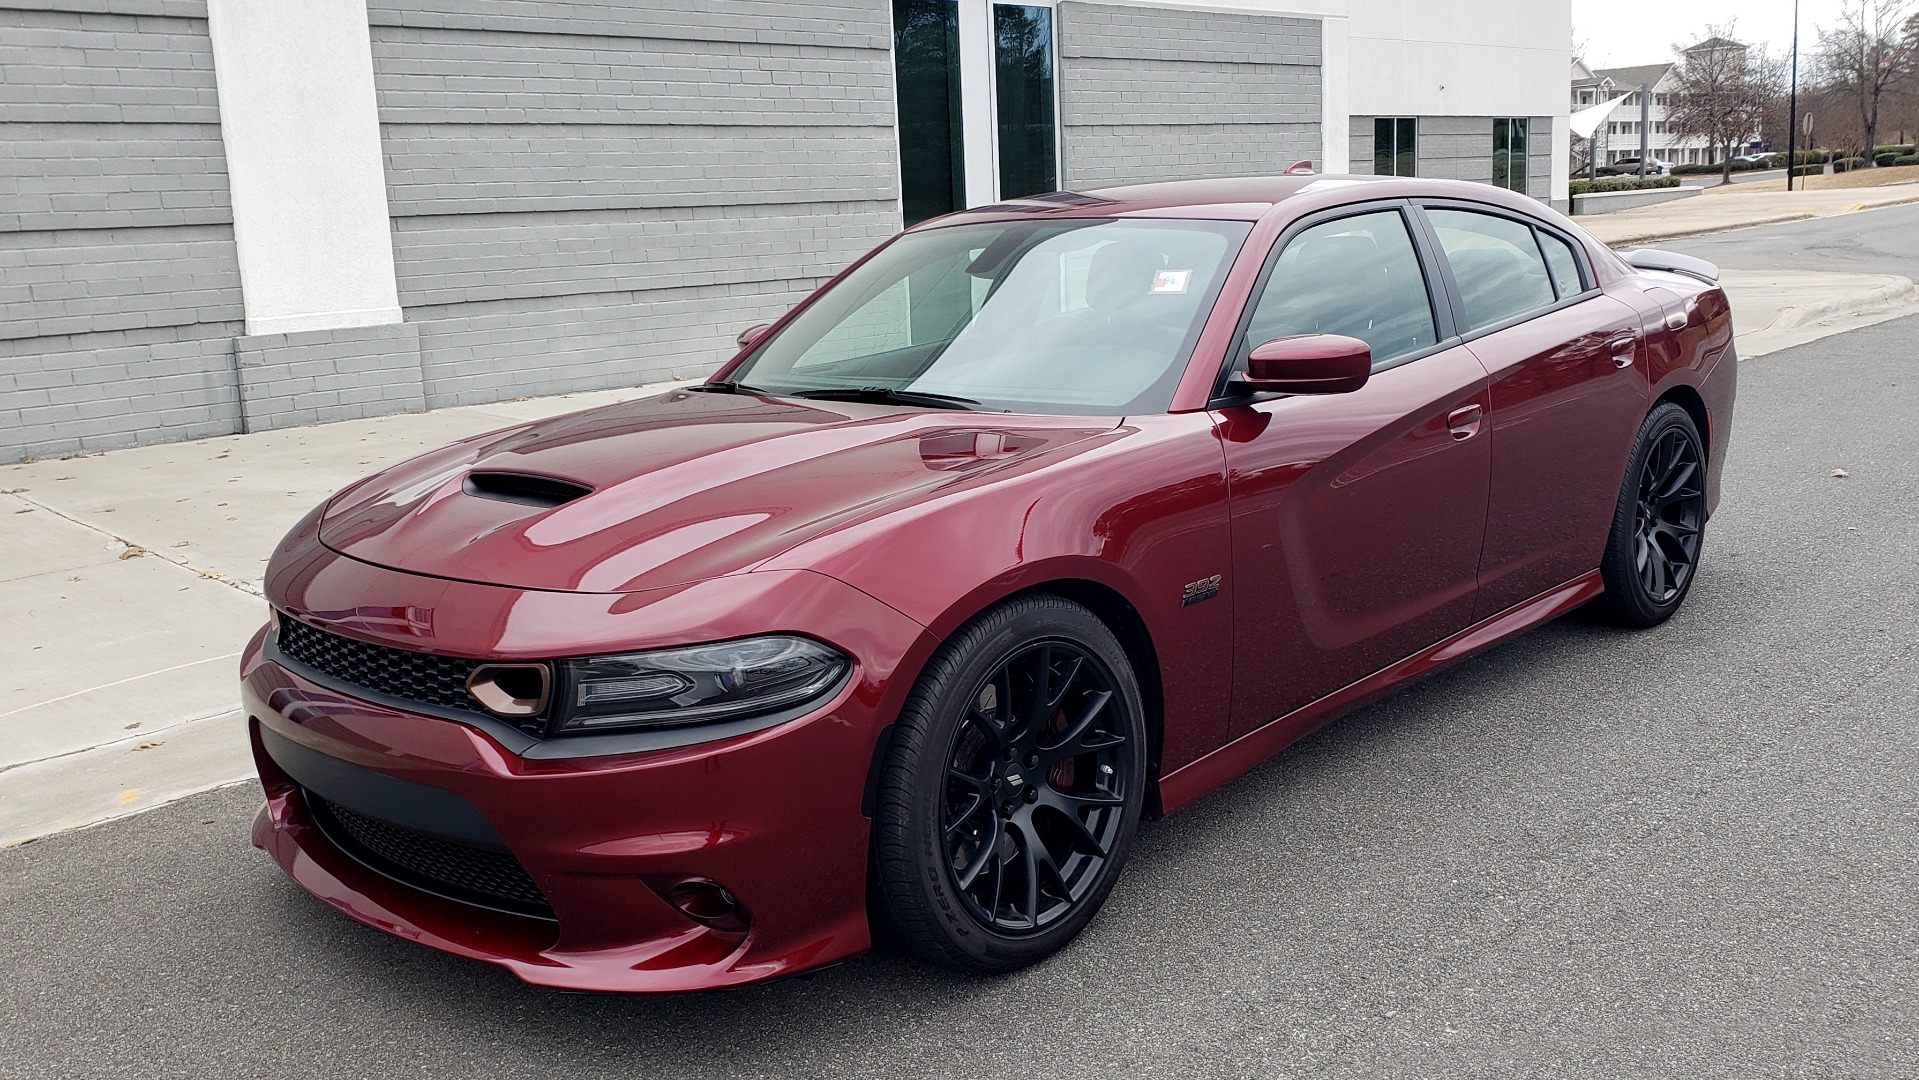 Used 2018 Dodge CHARGER R/T SCAT PACK / 6.4L 485HP / 8-SPD AUTO / HEATED / REARVIEW for sale Sold at Formula Imports in Charlotte NC 28227 1